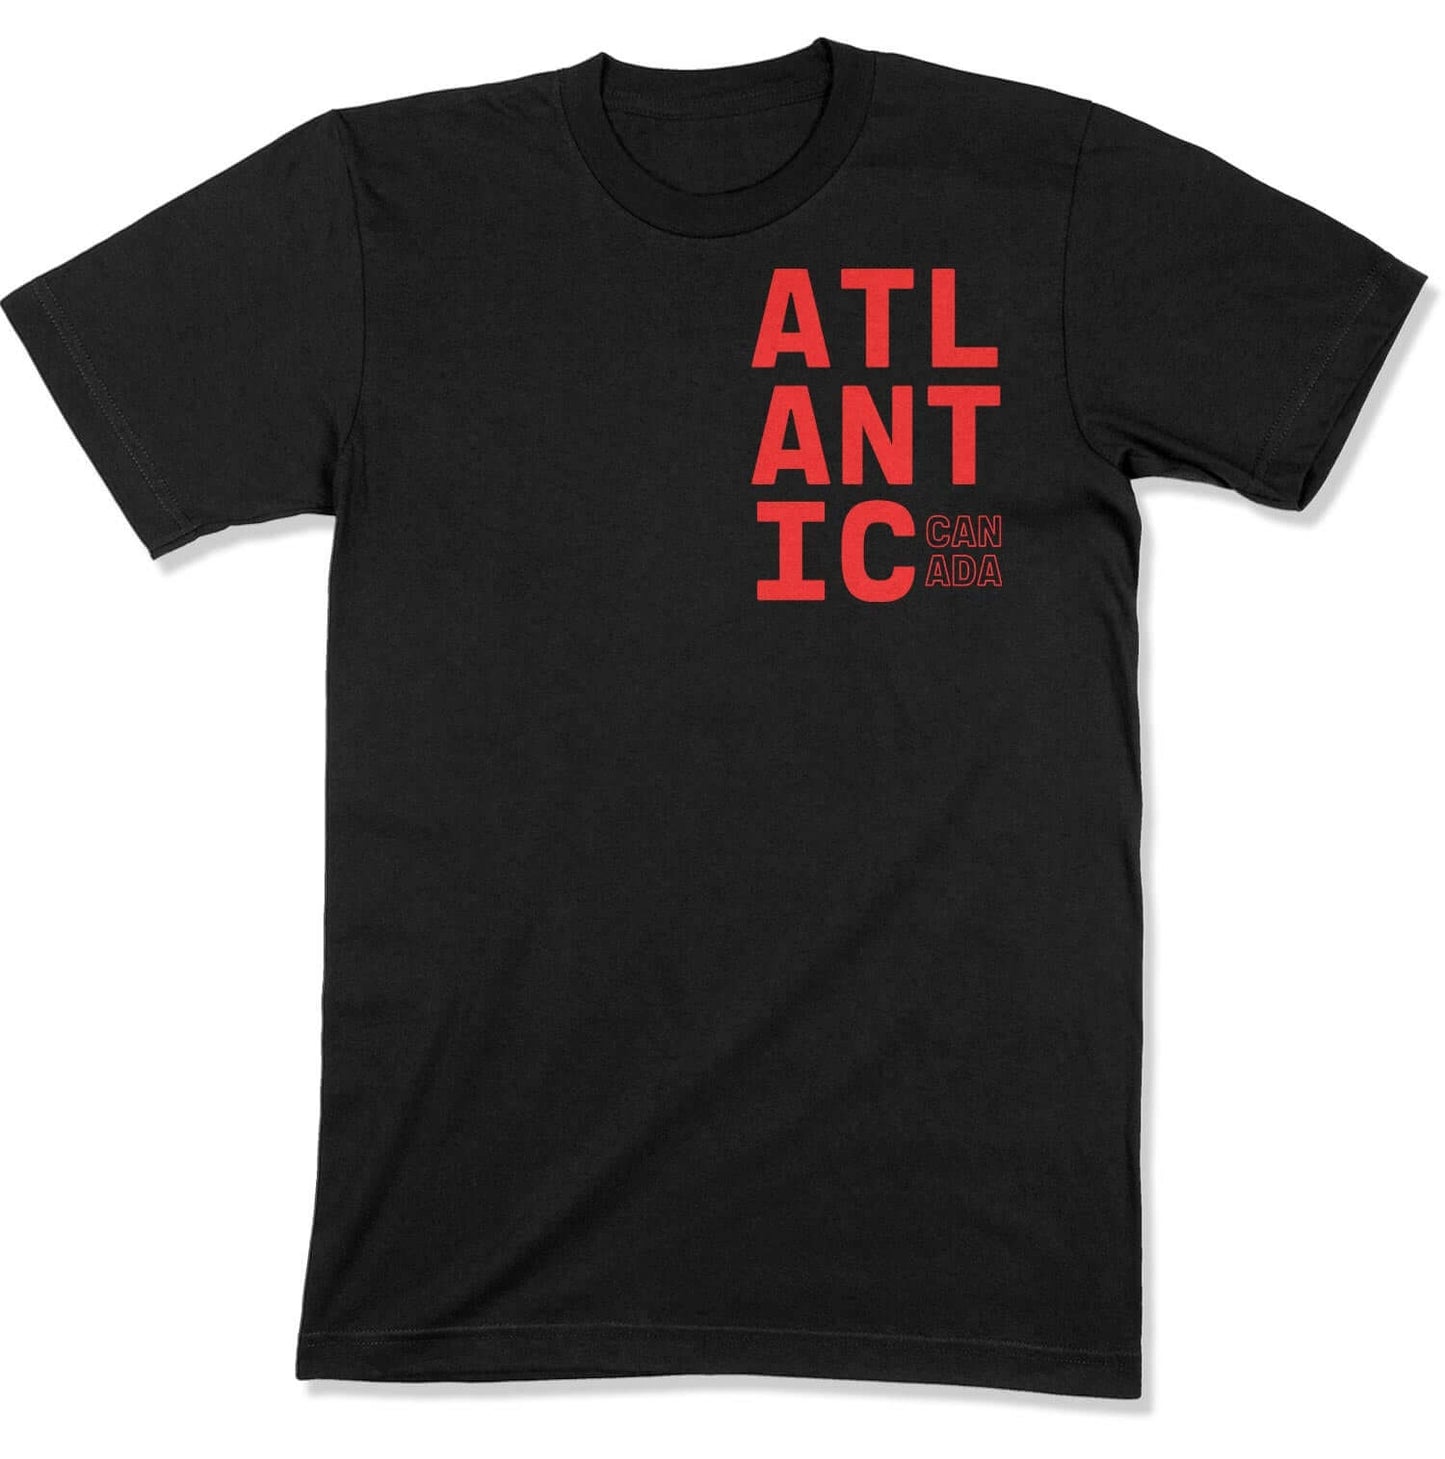 Atlantic Canada Unisex T-Shirt in Color: Black w/ Red Text - East Coast AF Apparel